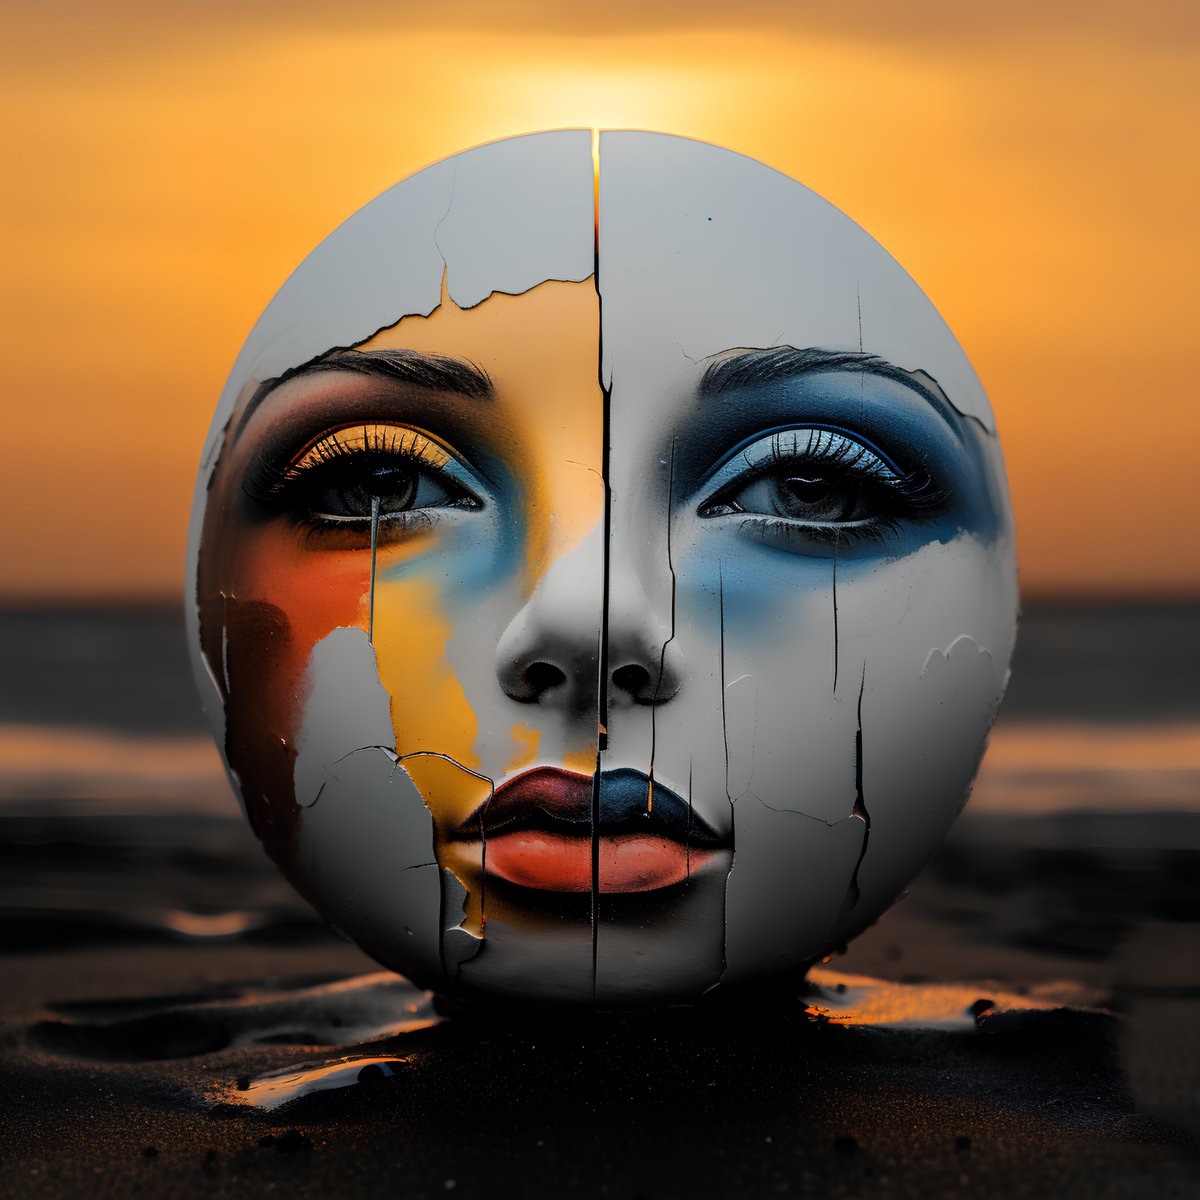 Minted and available in my collection 'AI/Photo Blend'
A blend of a real life sunset image of a Lensball from Malibu, Ca. and an AI generated image of a face.

The  result is my piece titled 'in a Sphere'

Feedback is always welcomed 
1/1
2 XTZ
4096 x 4096
Link in comments